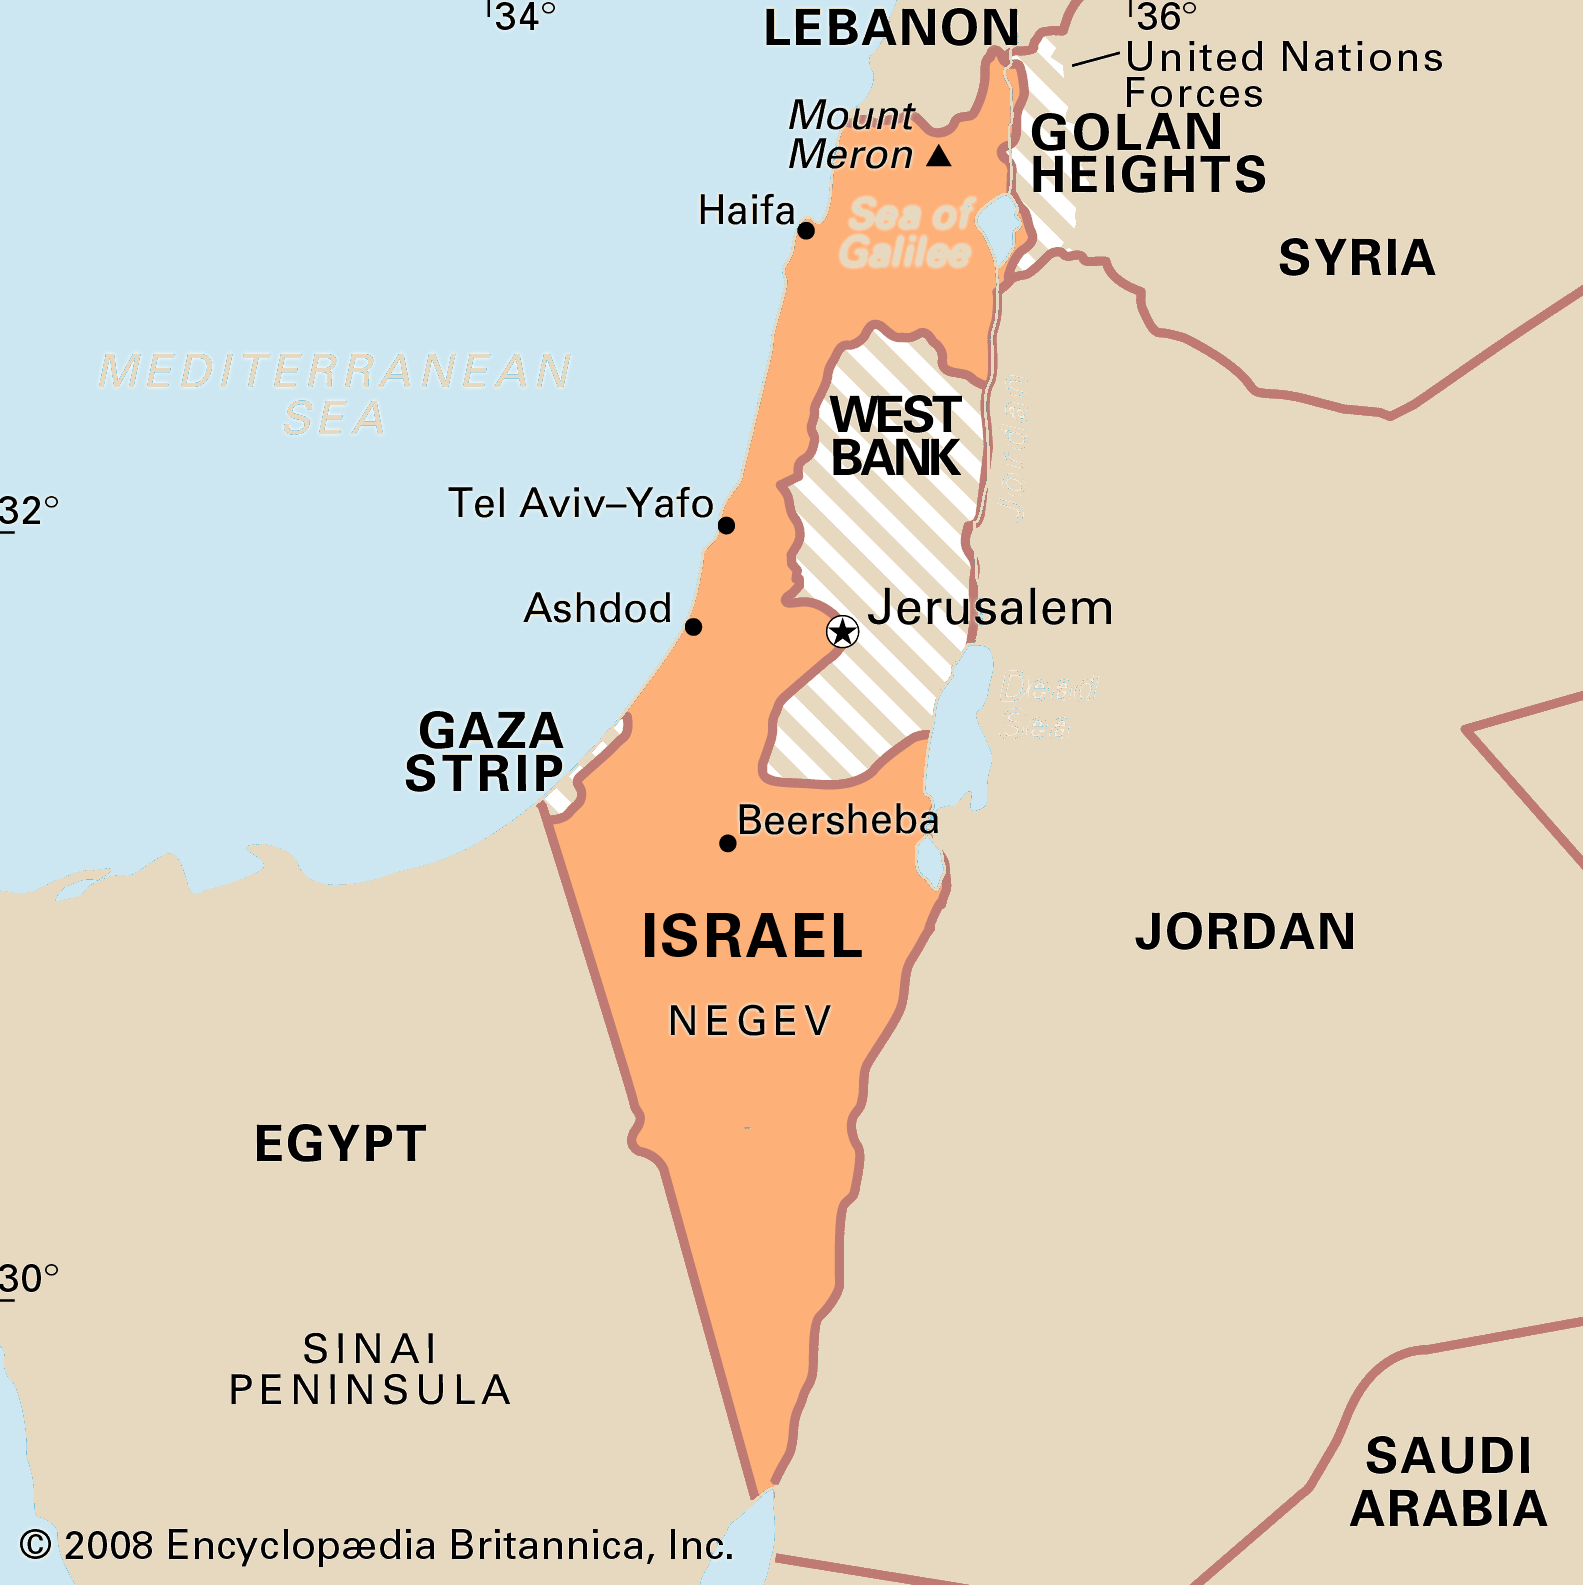 Israel map illustration shows how tiny and hemmed in the Gaza Strip is.